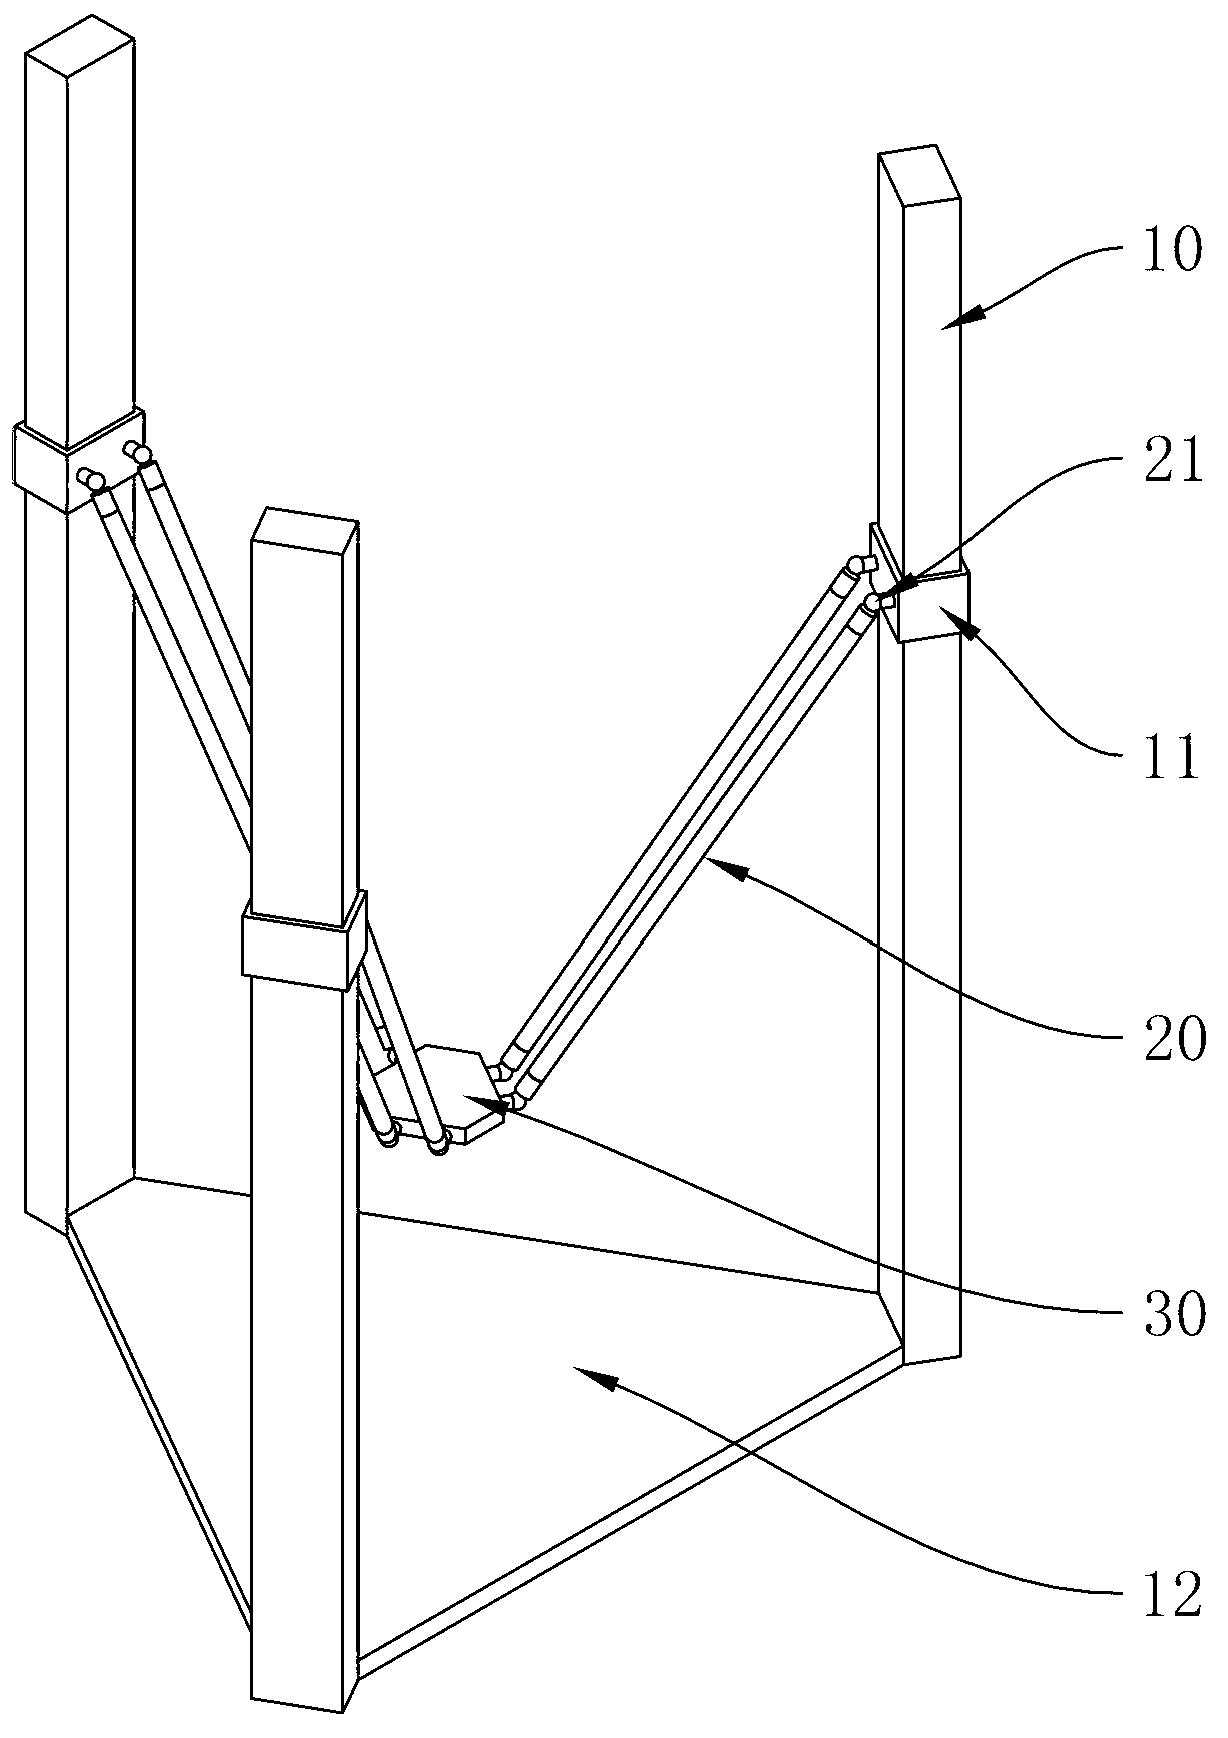 Three-freedom-degree and four-freedom-degree parallel mechanism